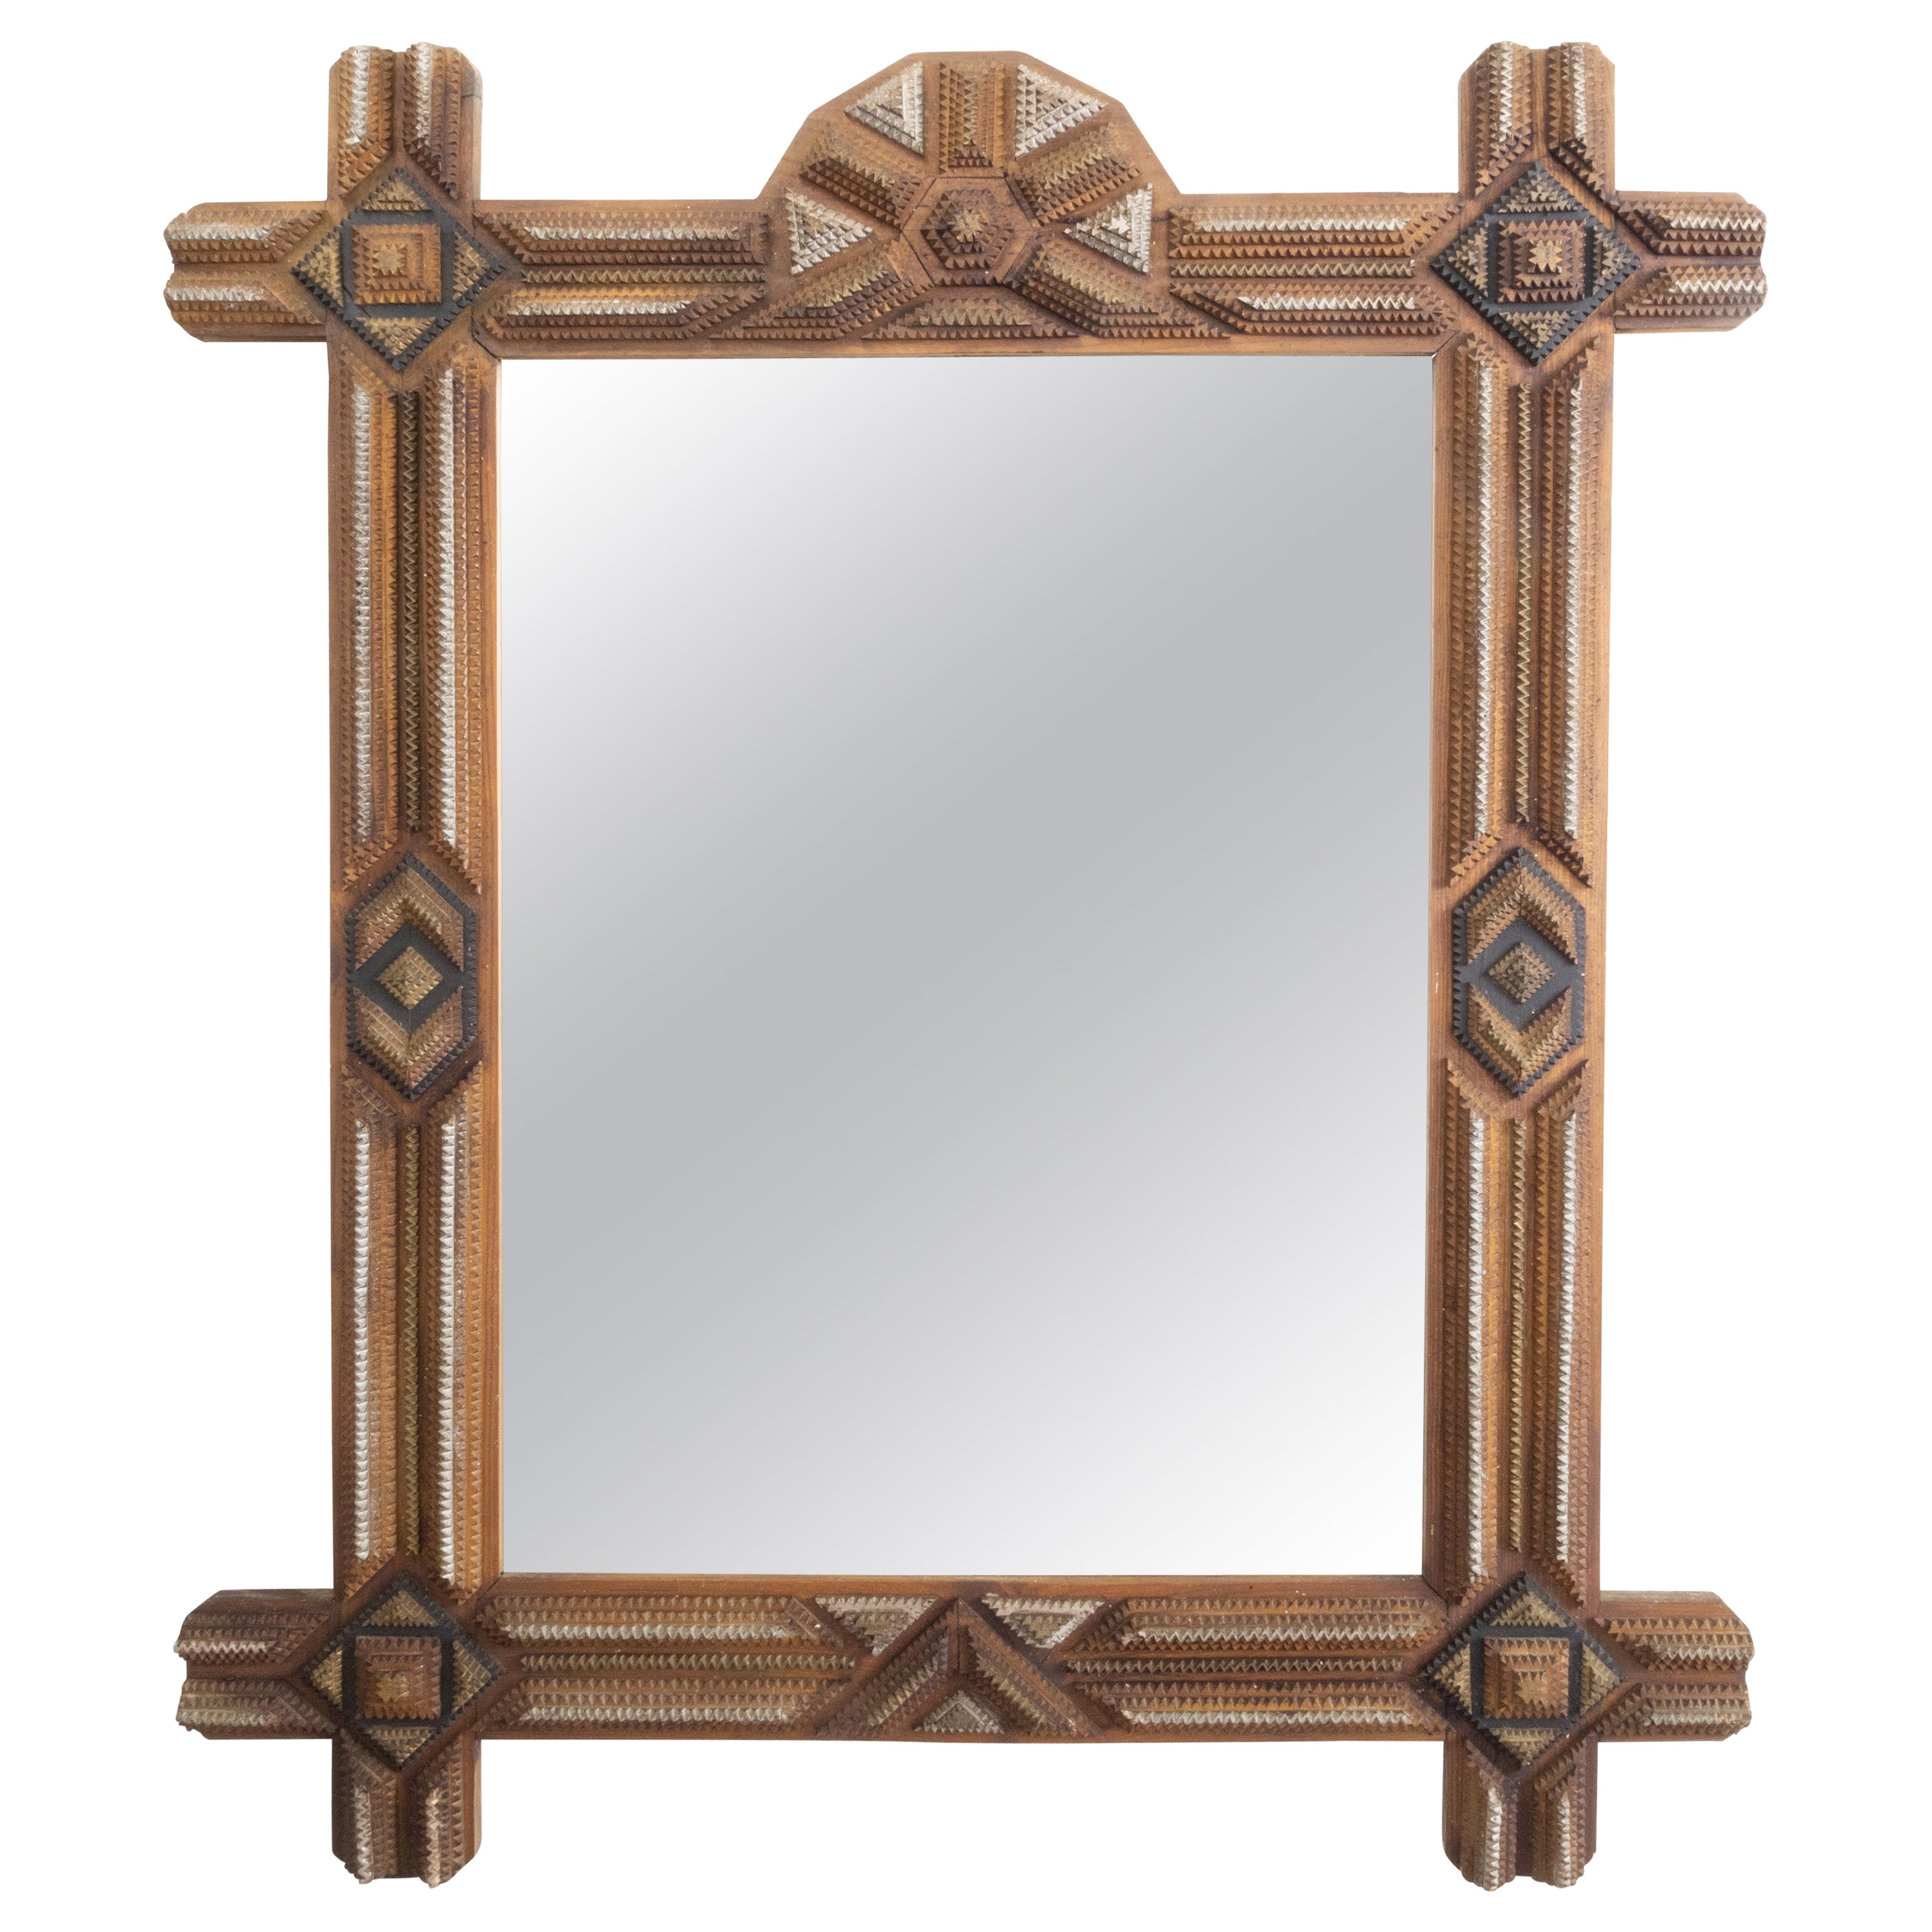 French 1900s Carved Tramp Art Mirror with Geometric Motifs and Painted Accents